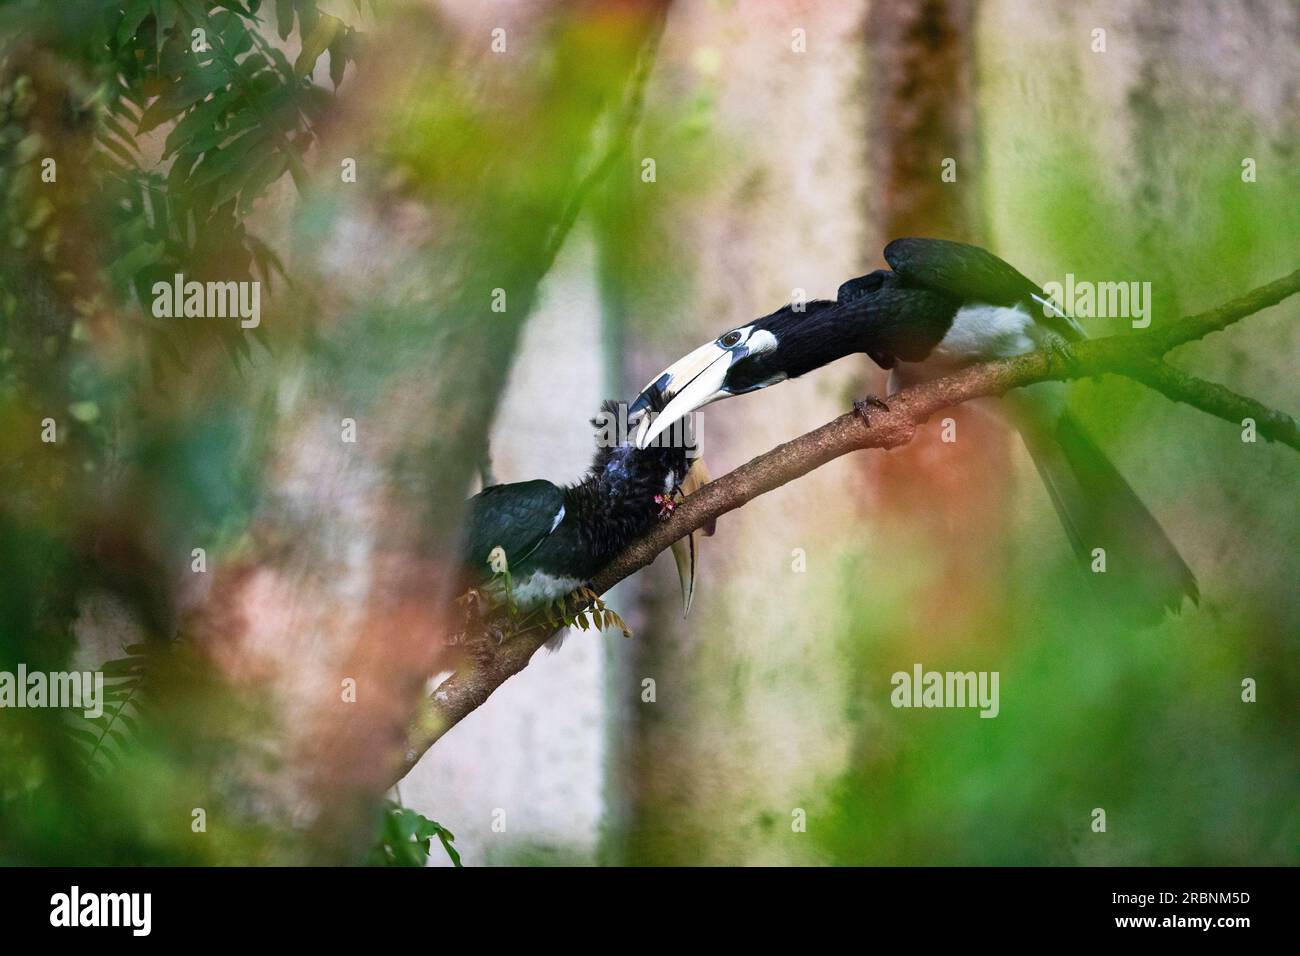 A pair of adult male oriental pied hornbills interact in a similar way to courtship behaviour, Singapore Stock Photo